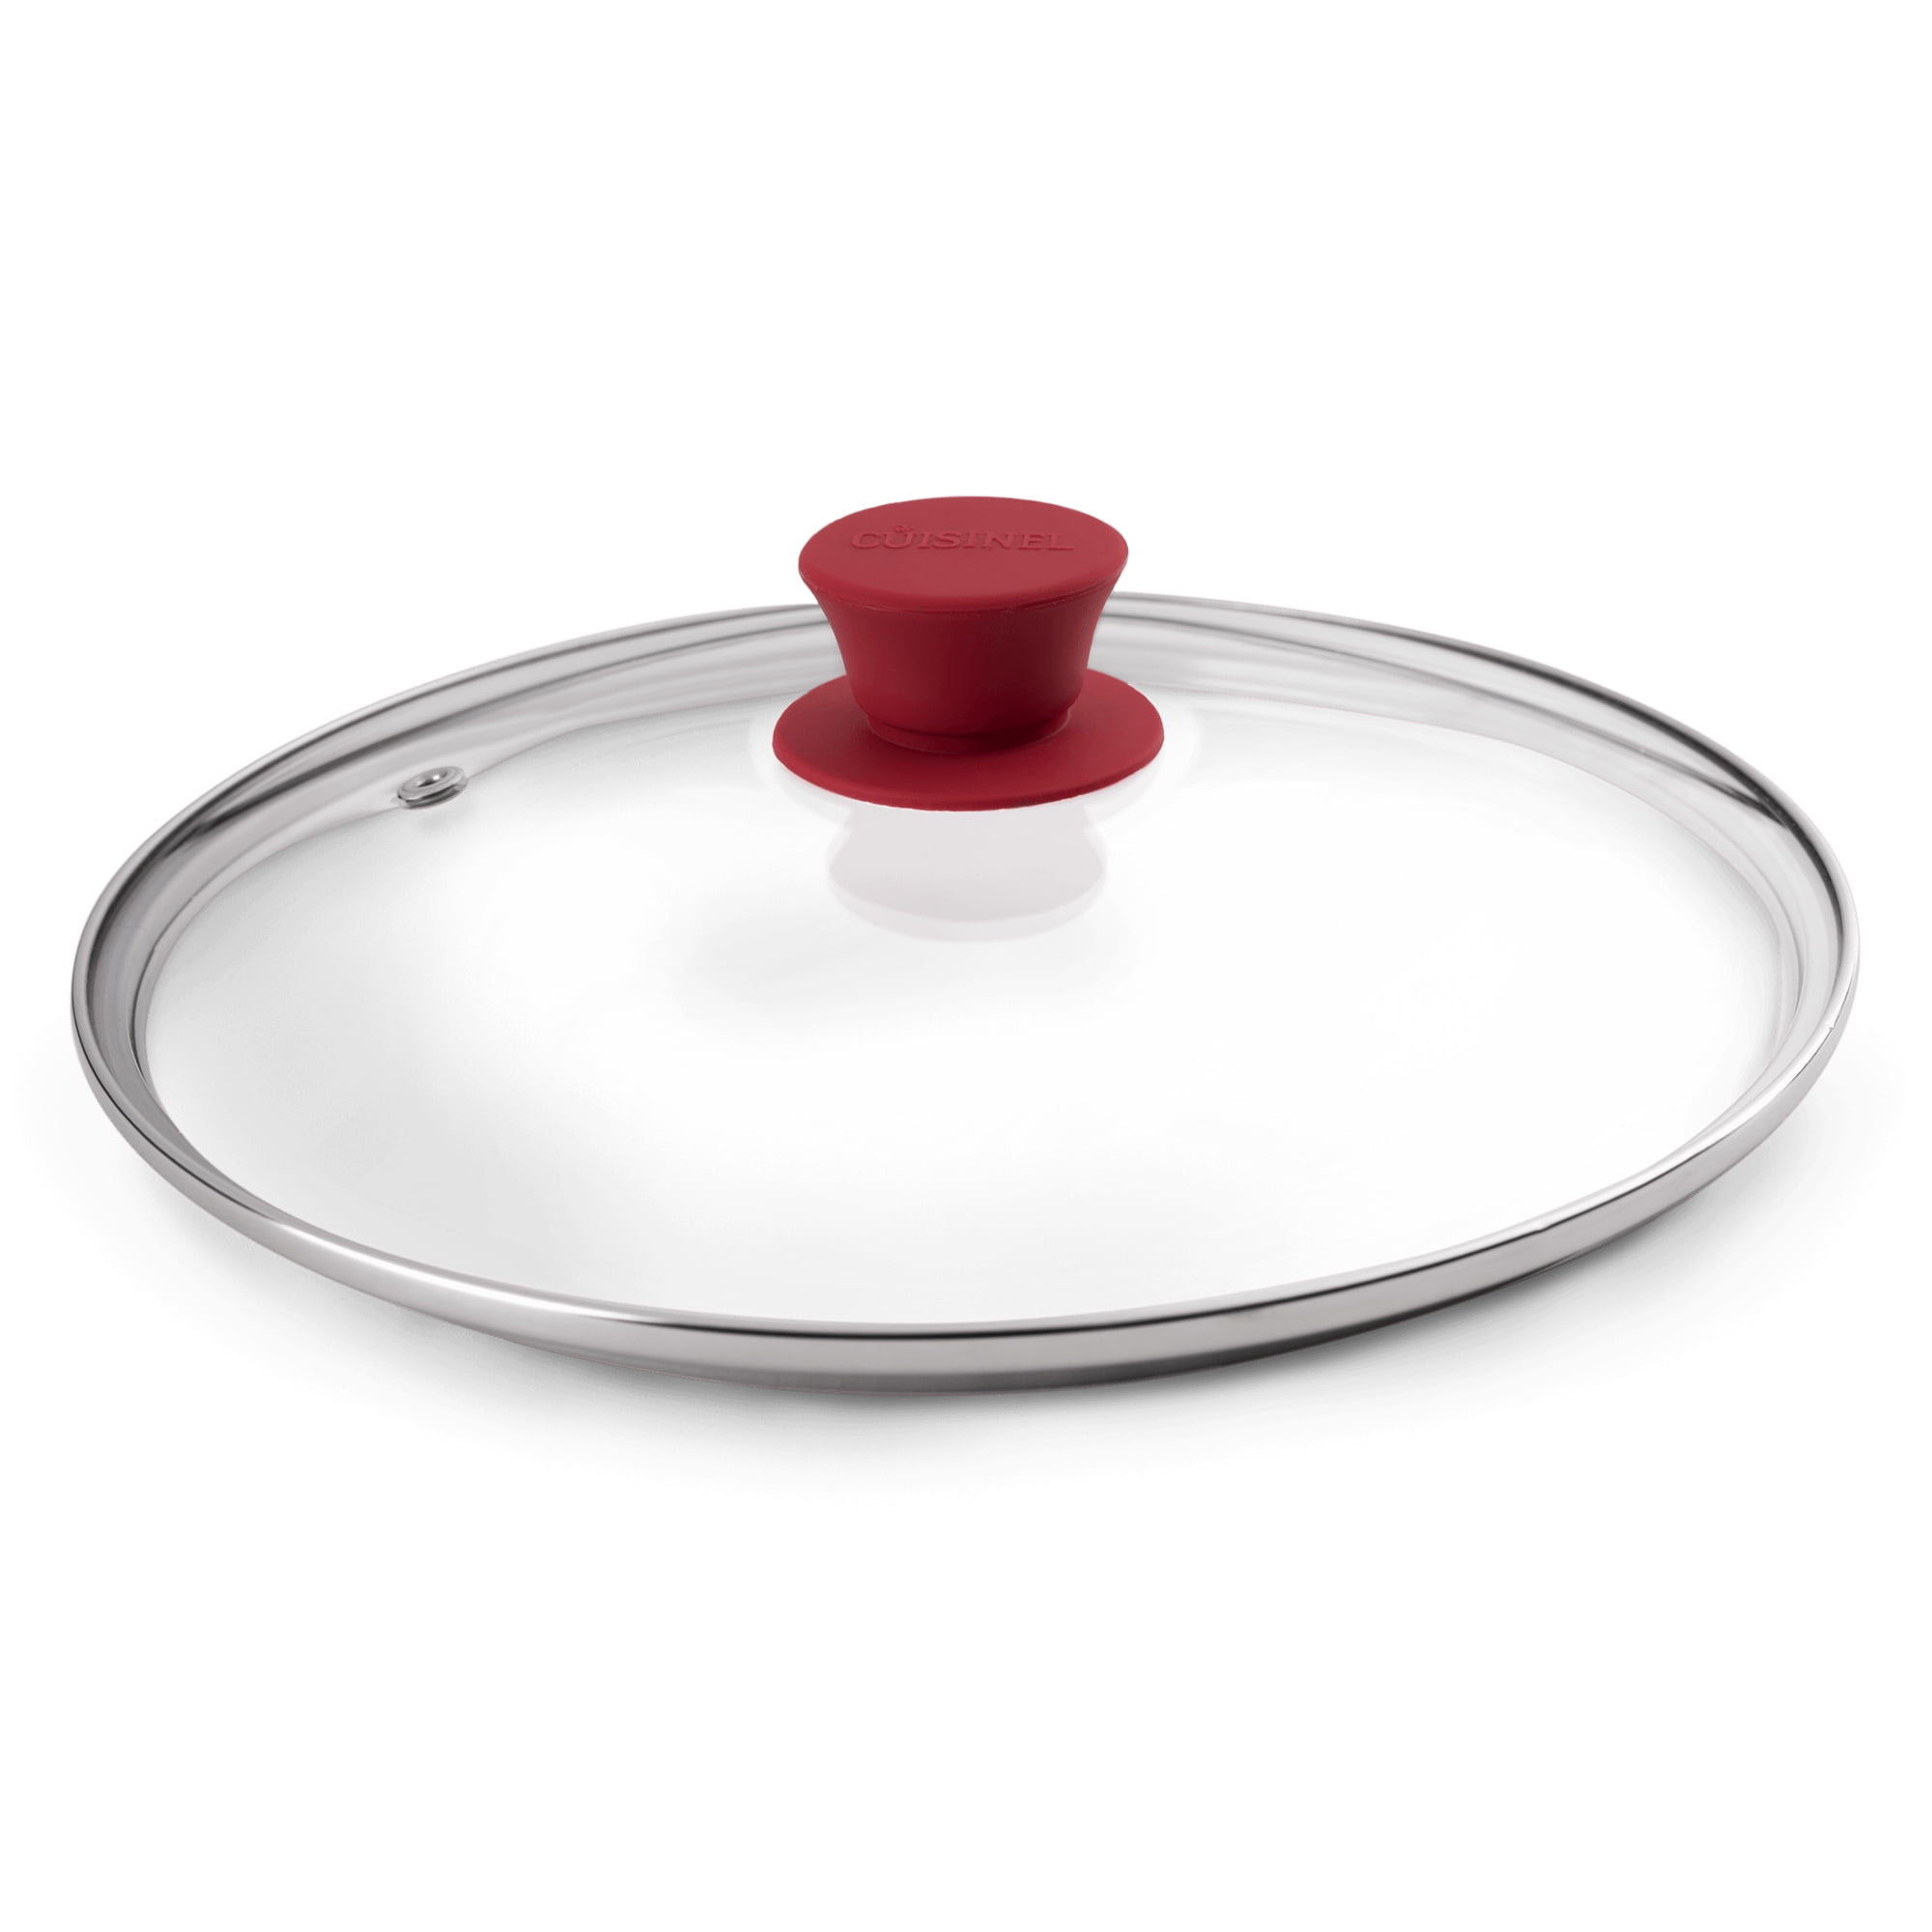  Glass Lid - 10-inch/25.4-cm/264mm - Compatible with Lodge -  Fully Assembled Tempered Replacement Cover - Oven Safe for Skillet Pots  Pans - Universal for all Cookware: Cast Iron, Stainless Steel: Home